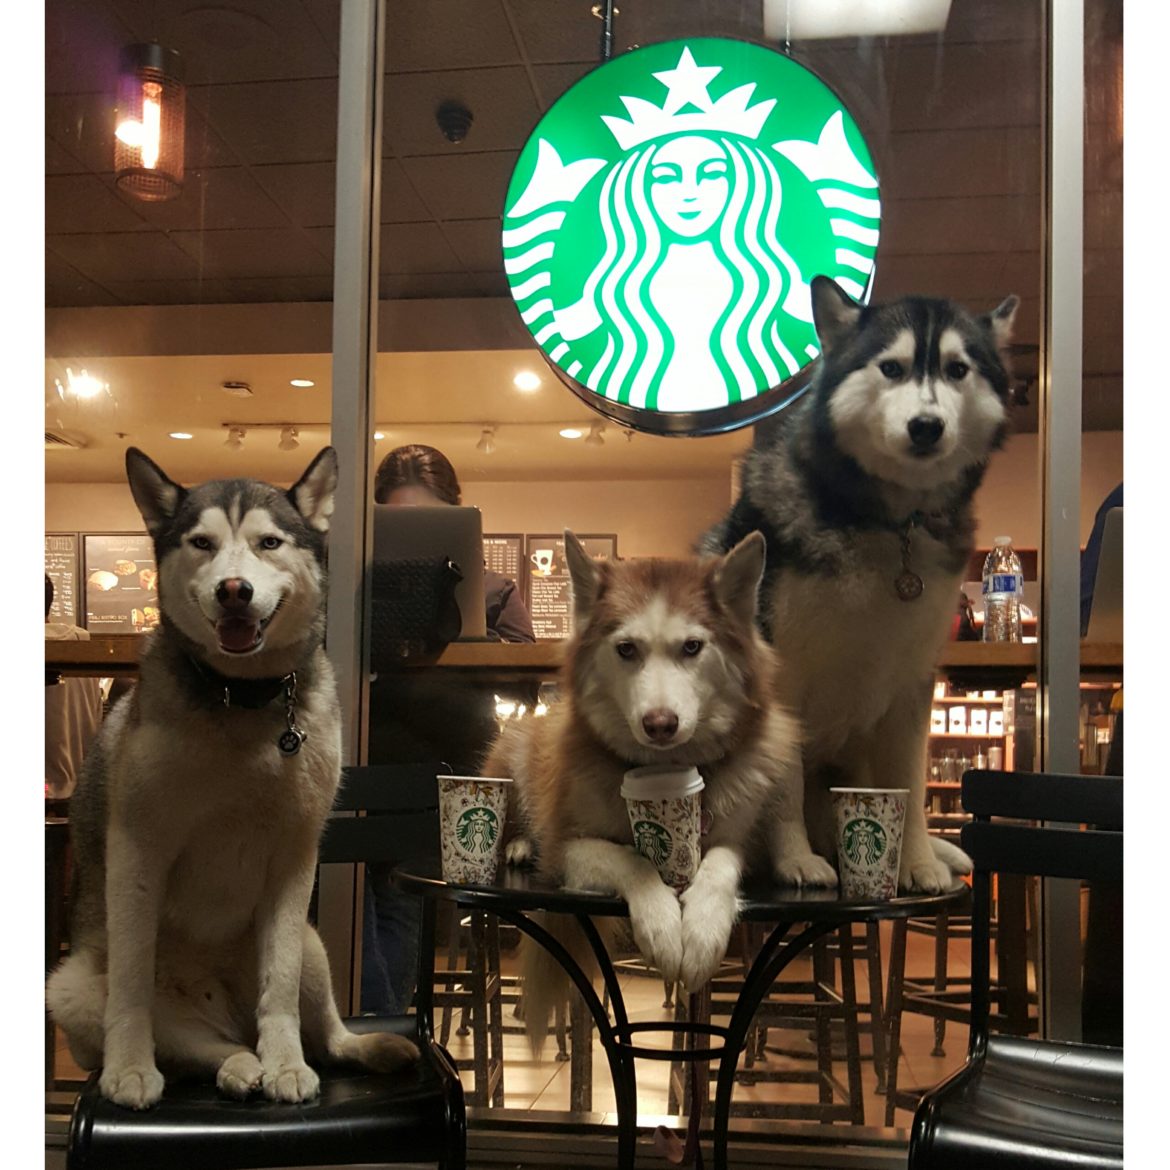 The Husky Trio Love Starbucks and the Fall Cups!